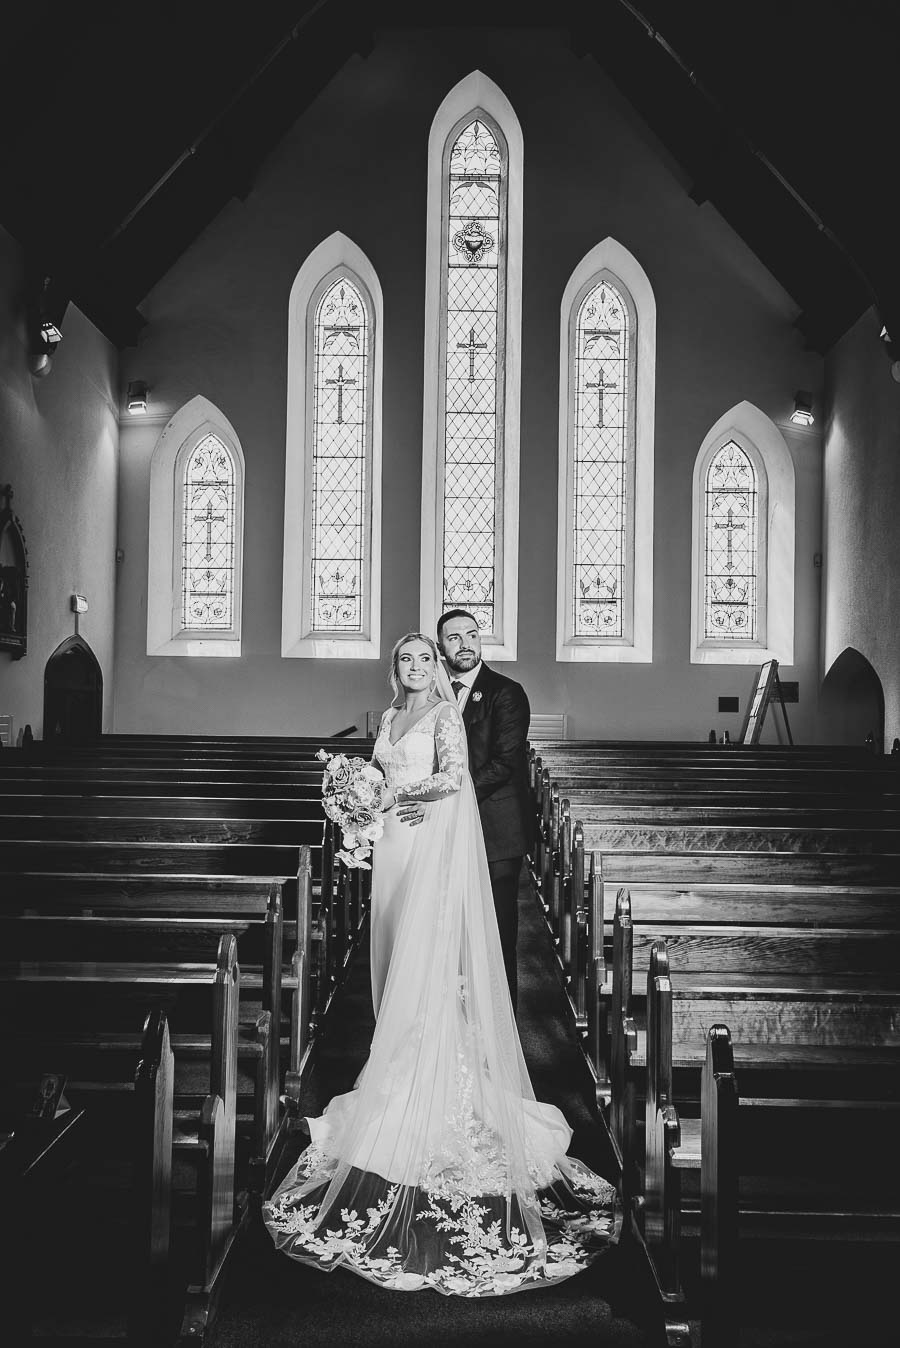 Melissa & Aidan standing in the aisle with beautiful stain glassed windows in background